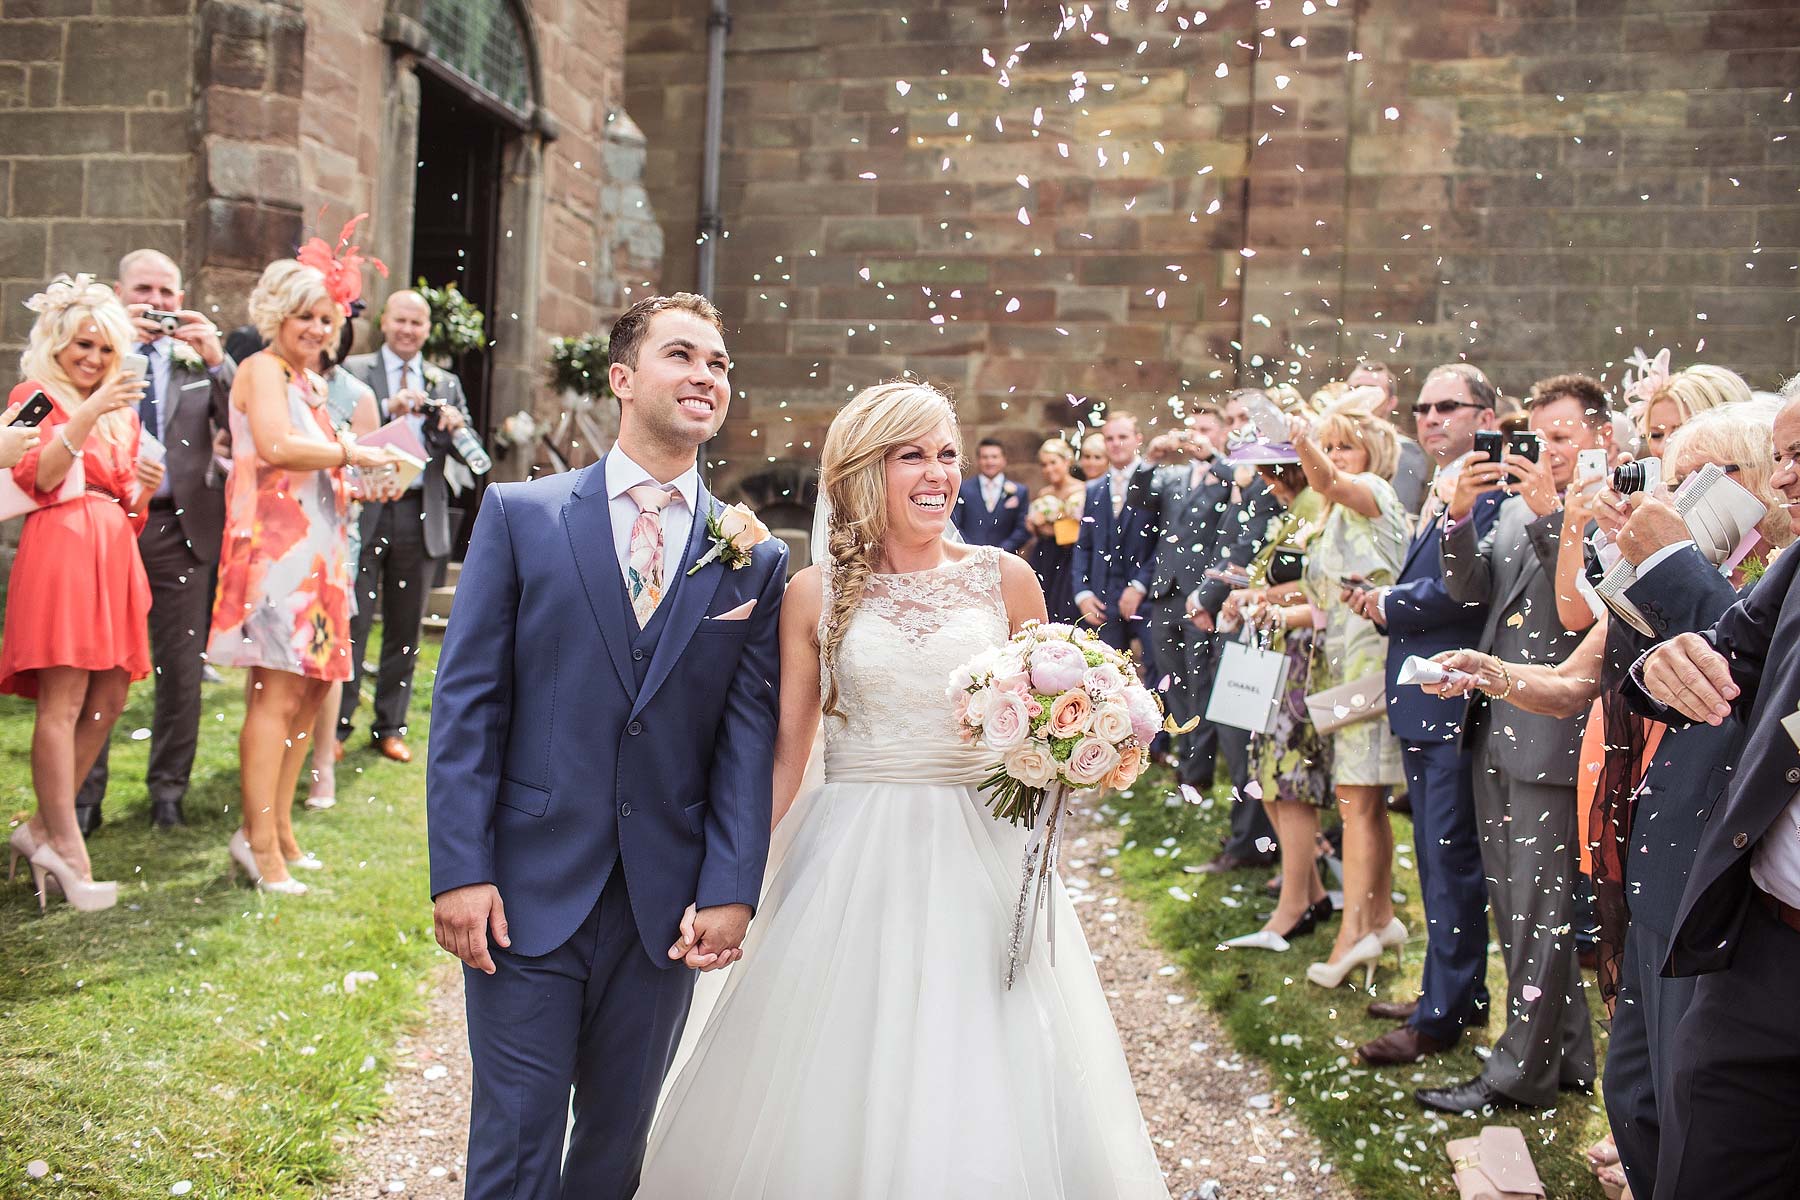 Photograph of wedding confetti at St Andrews Church Weston Park in Staffordshire by Documentary Wedding Photographer Stuart James